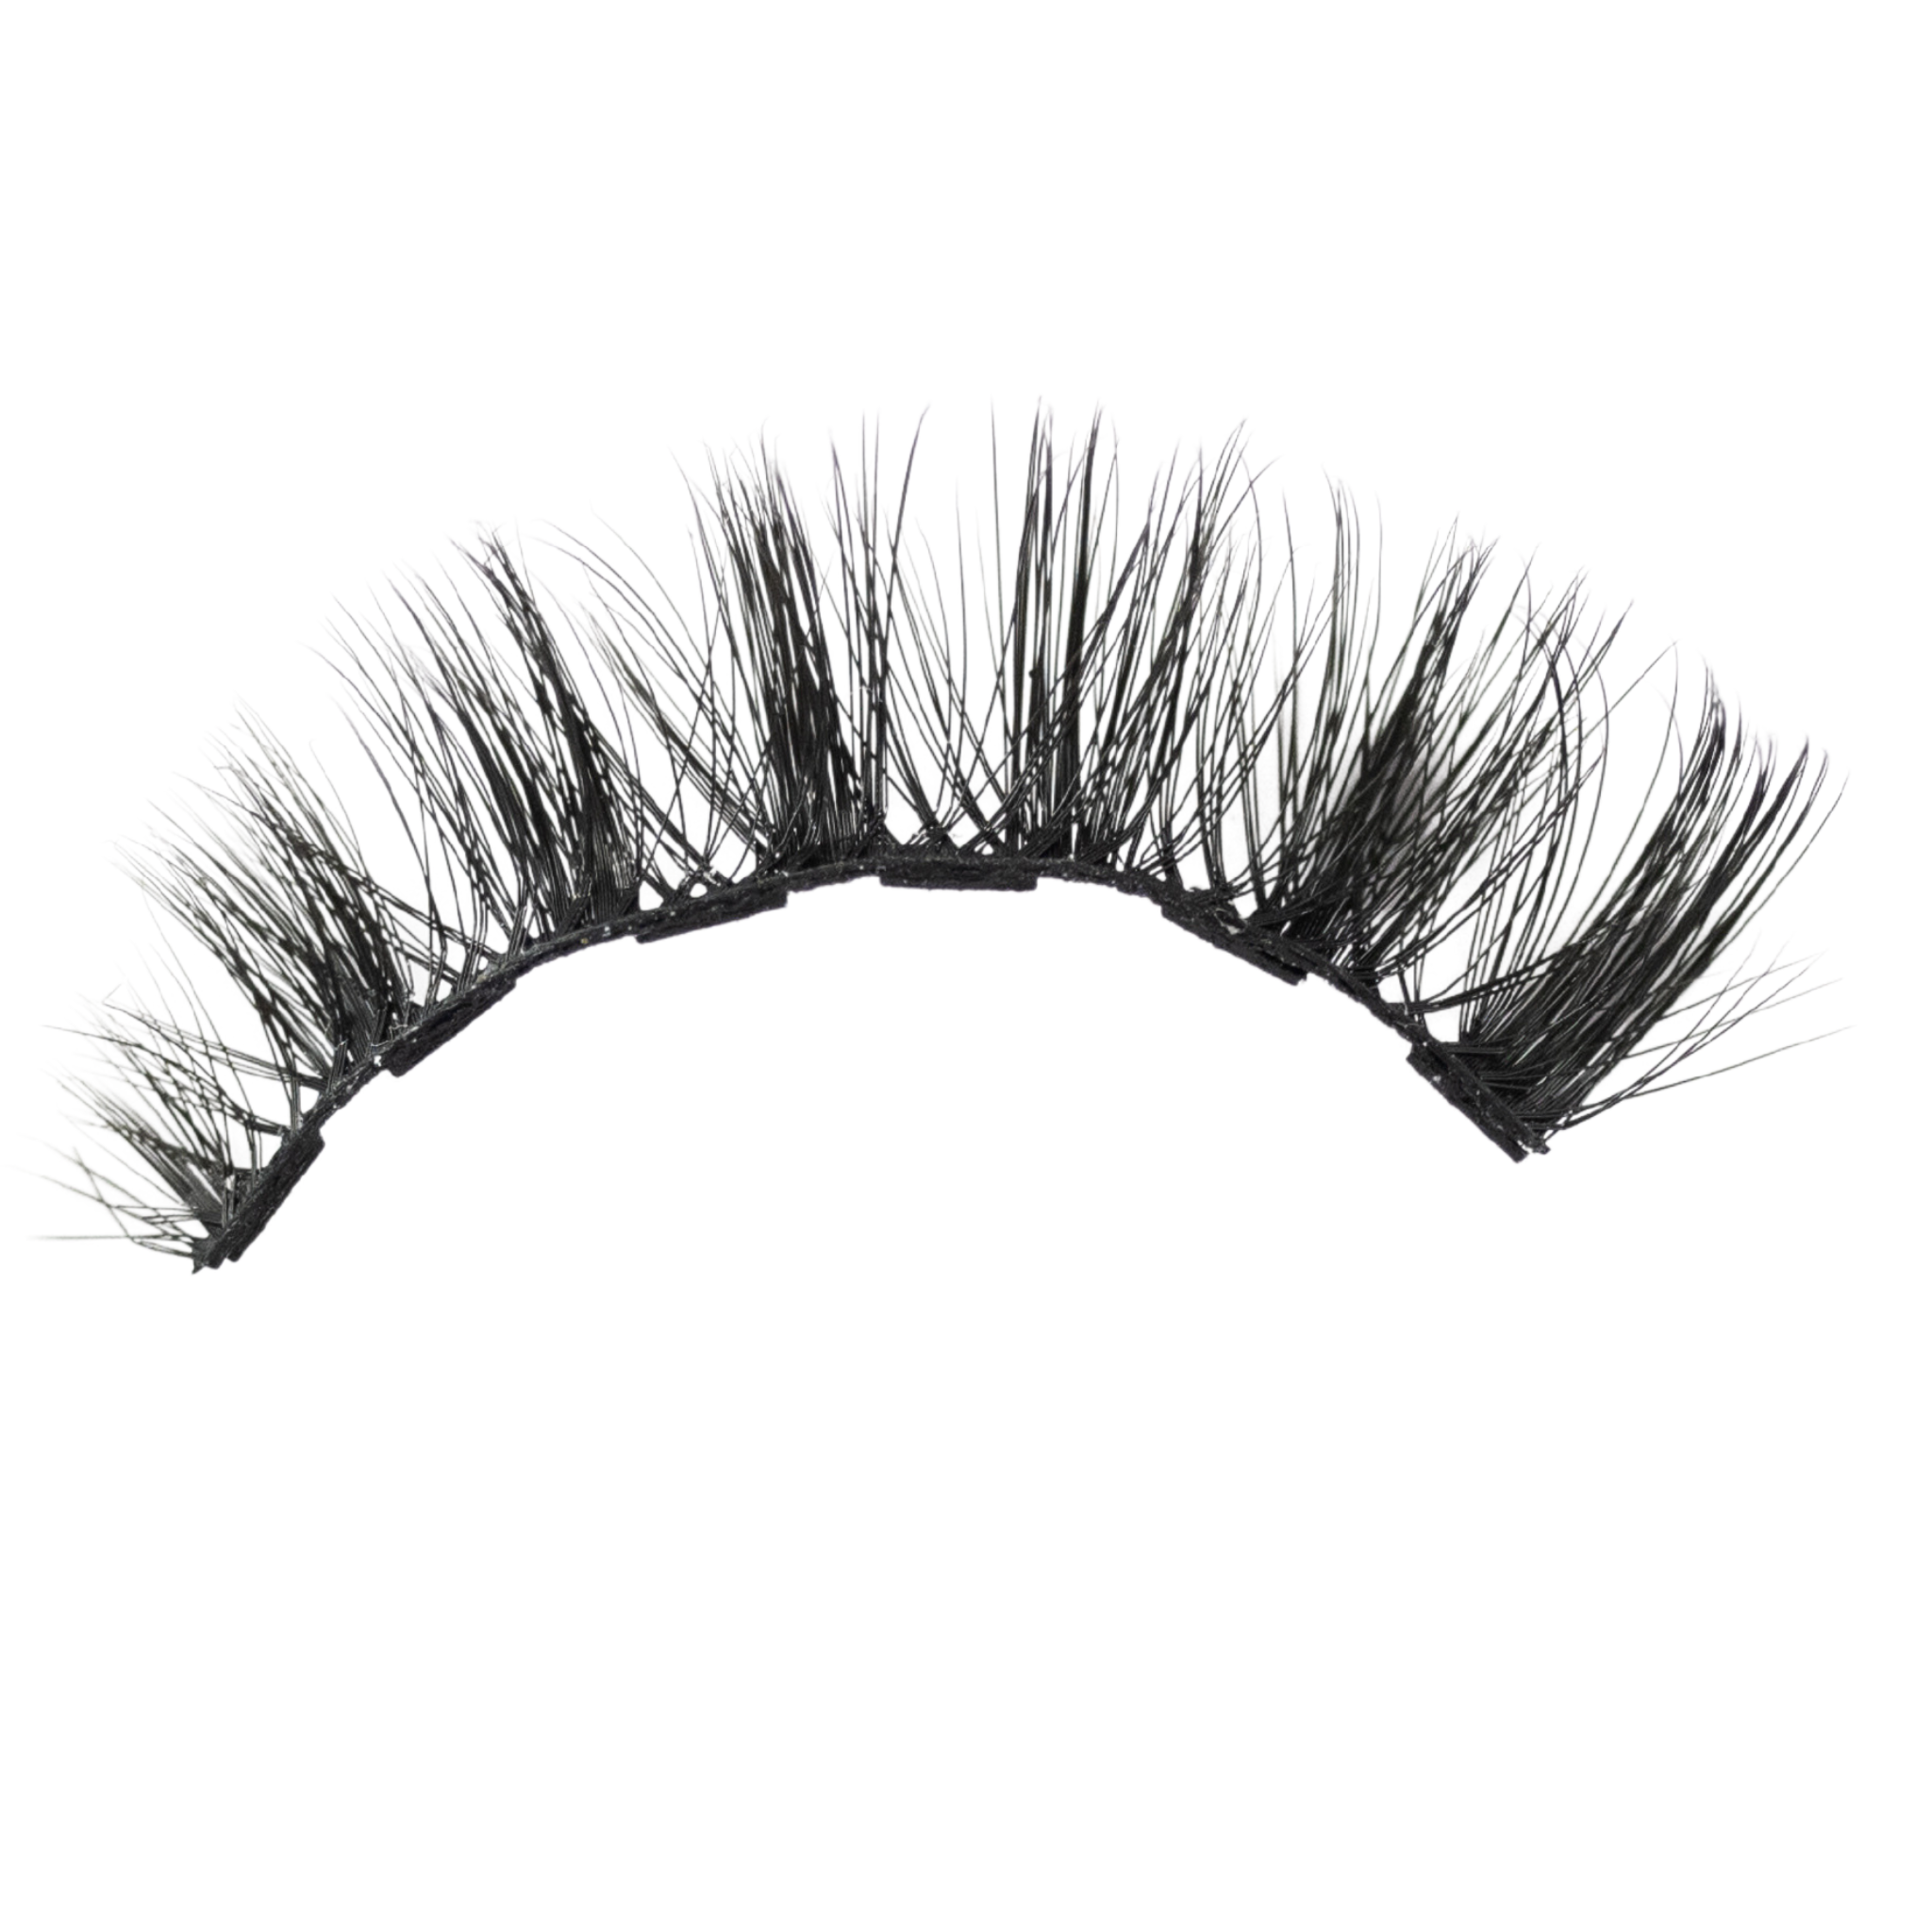 3D Curl Magnetic Eyelash. Hollaback Curl 3D Magnetic False Eyelashes - Premium Reusable Magnetic Eyelashes. 100% Cruelty-Free & Vegan Fibers. Sustainably Packaged. Compostable Trays.